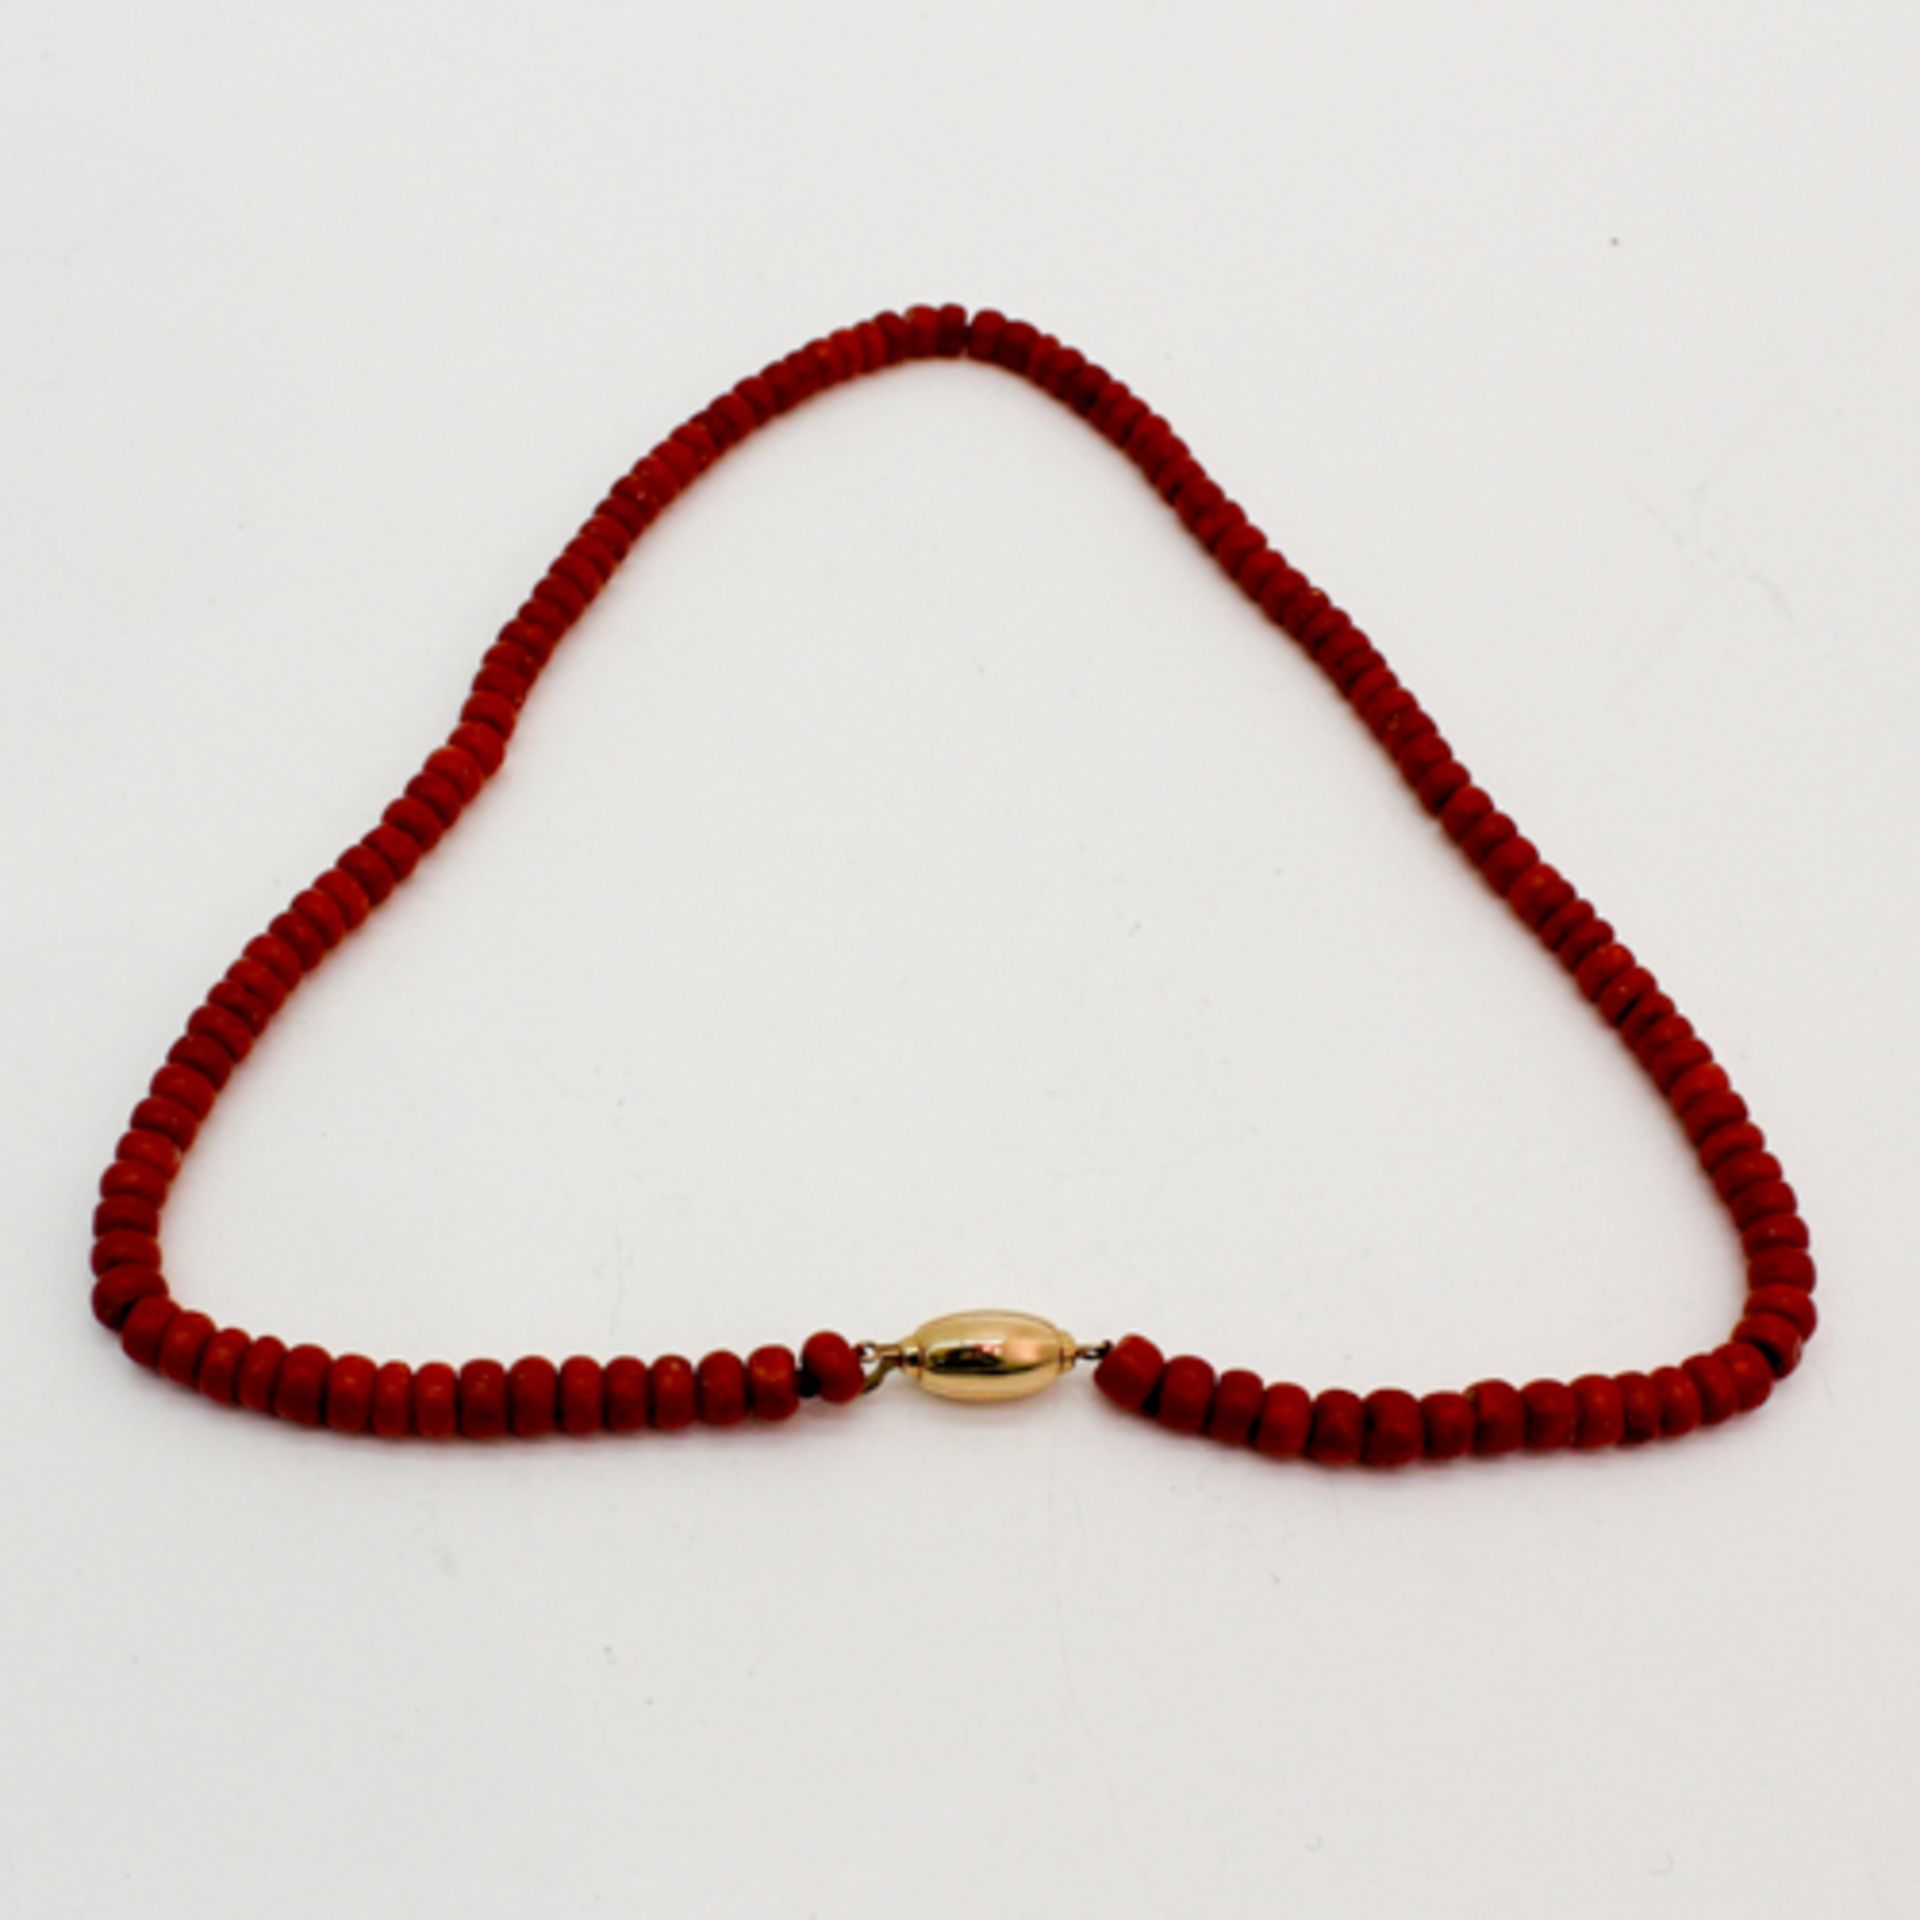 RED CORAL NECKLACE WITH 14KG CLASP Red coral is 6 - 8 mm in diameter, 34 gram.